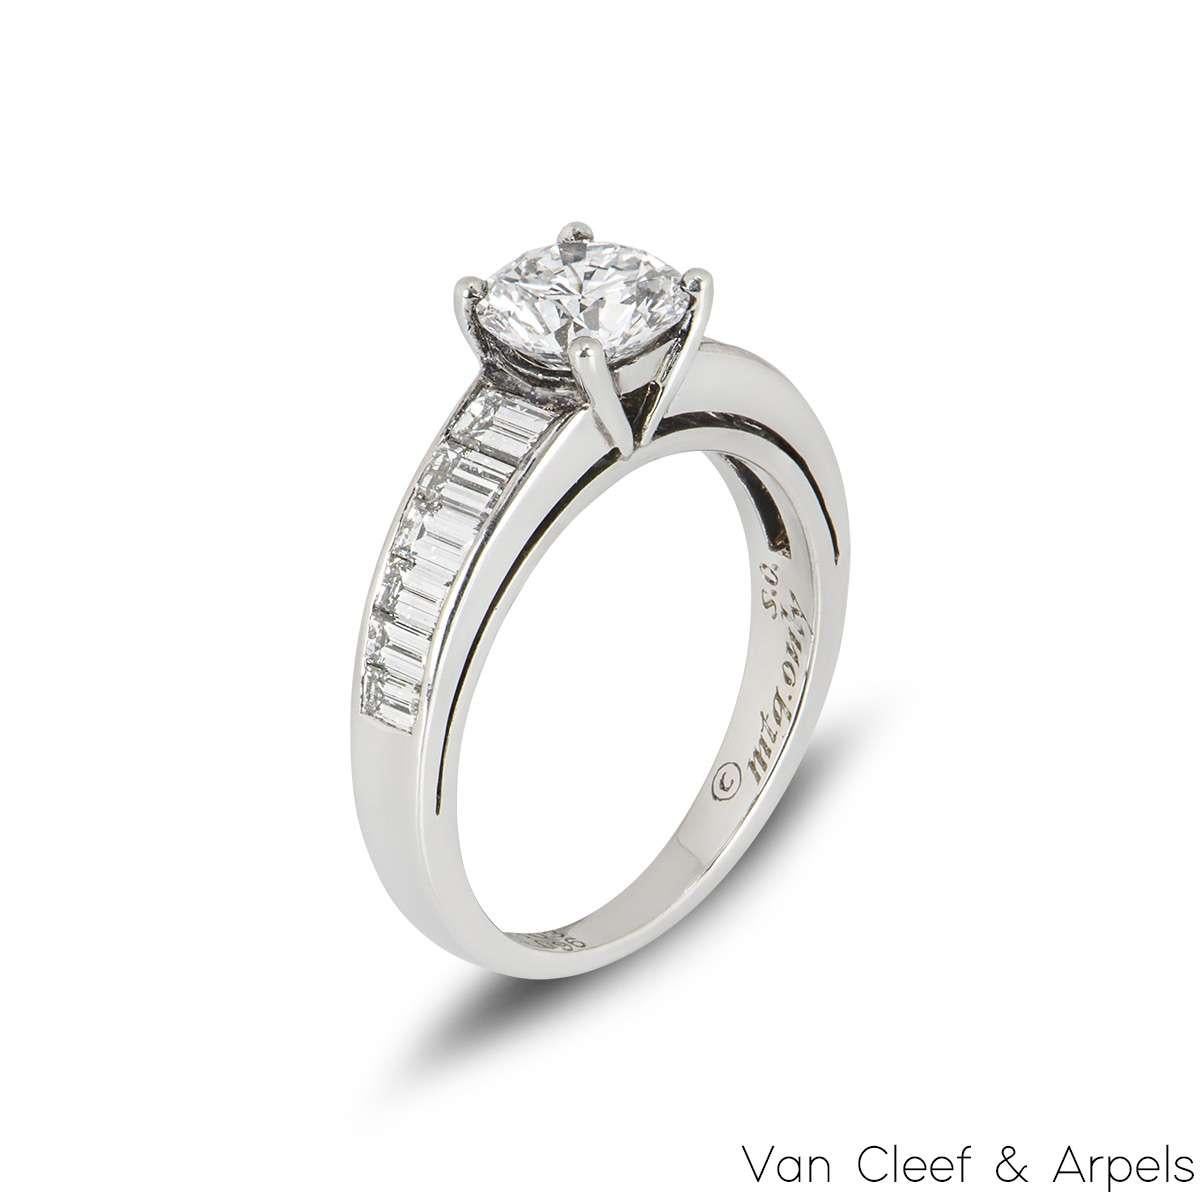 A stunning single stone diamond ring in platinum by Van Cleef and Arpels. The ring is set to the centre with a round brilliant cut diamond in a four claw setting weighing 1.03ct, it is D-E in colour and VS in clarity. The centre stone is